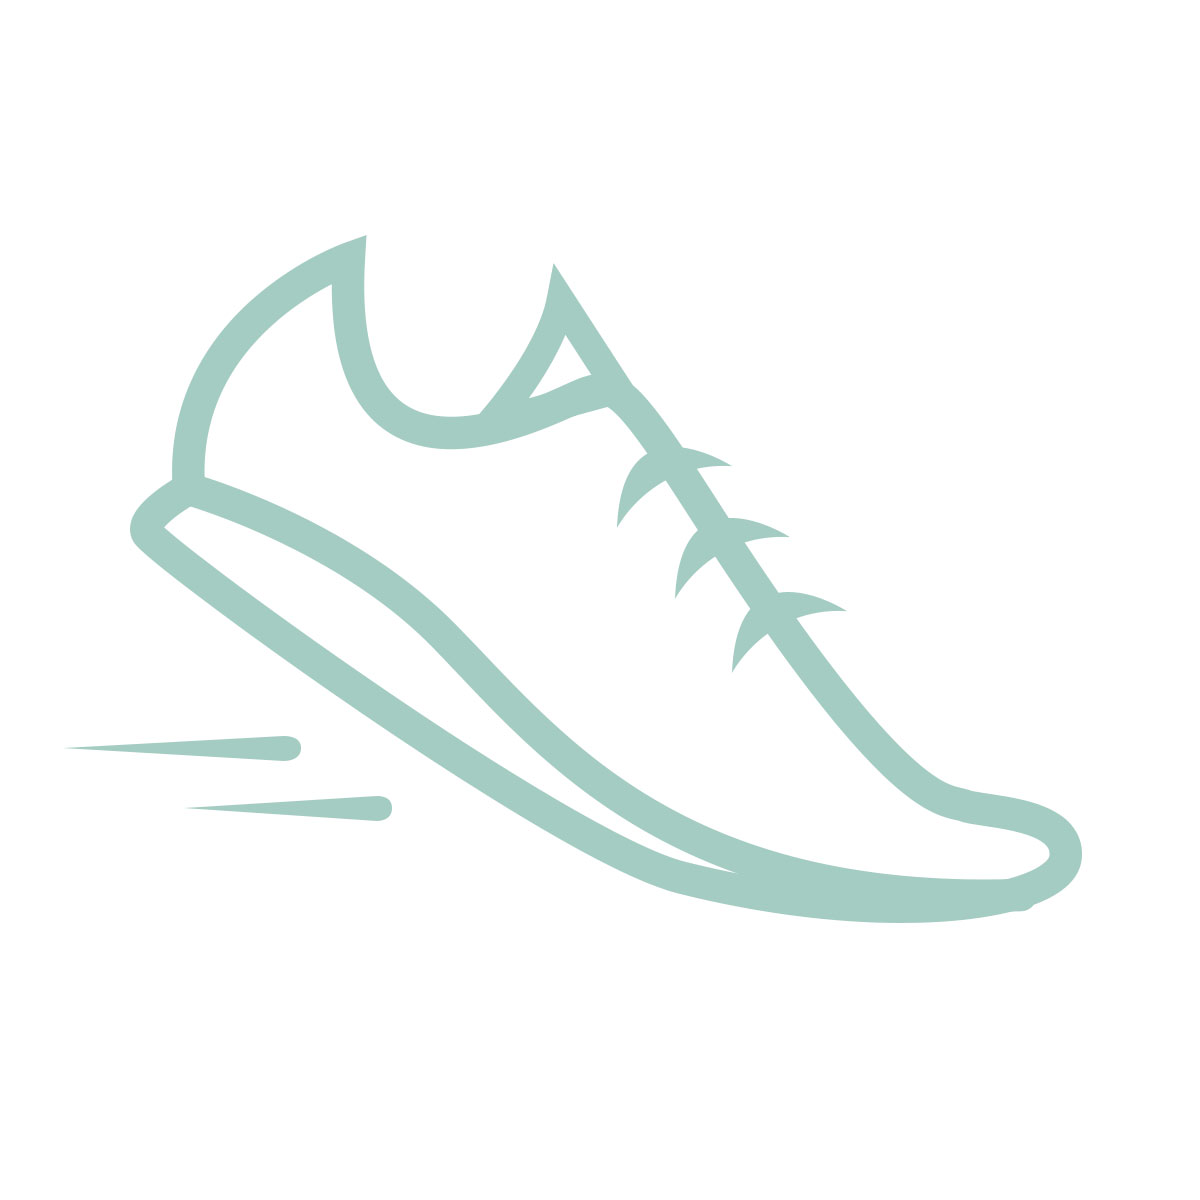 Gawler Balaklava Podiatry Foot Care and Sports Feet Solutions